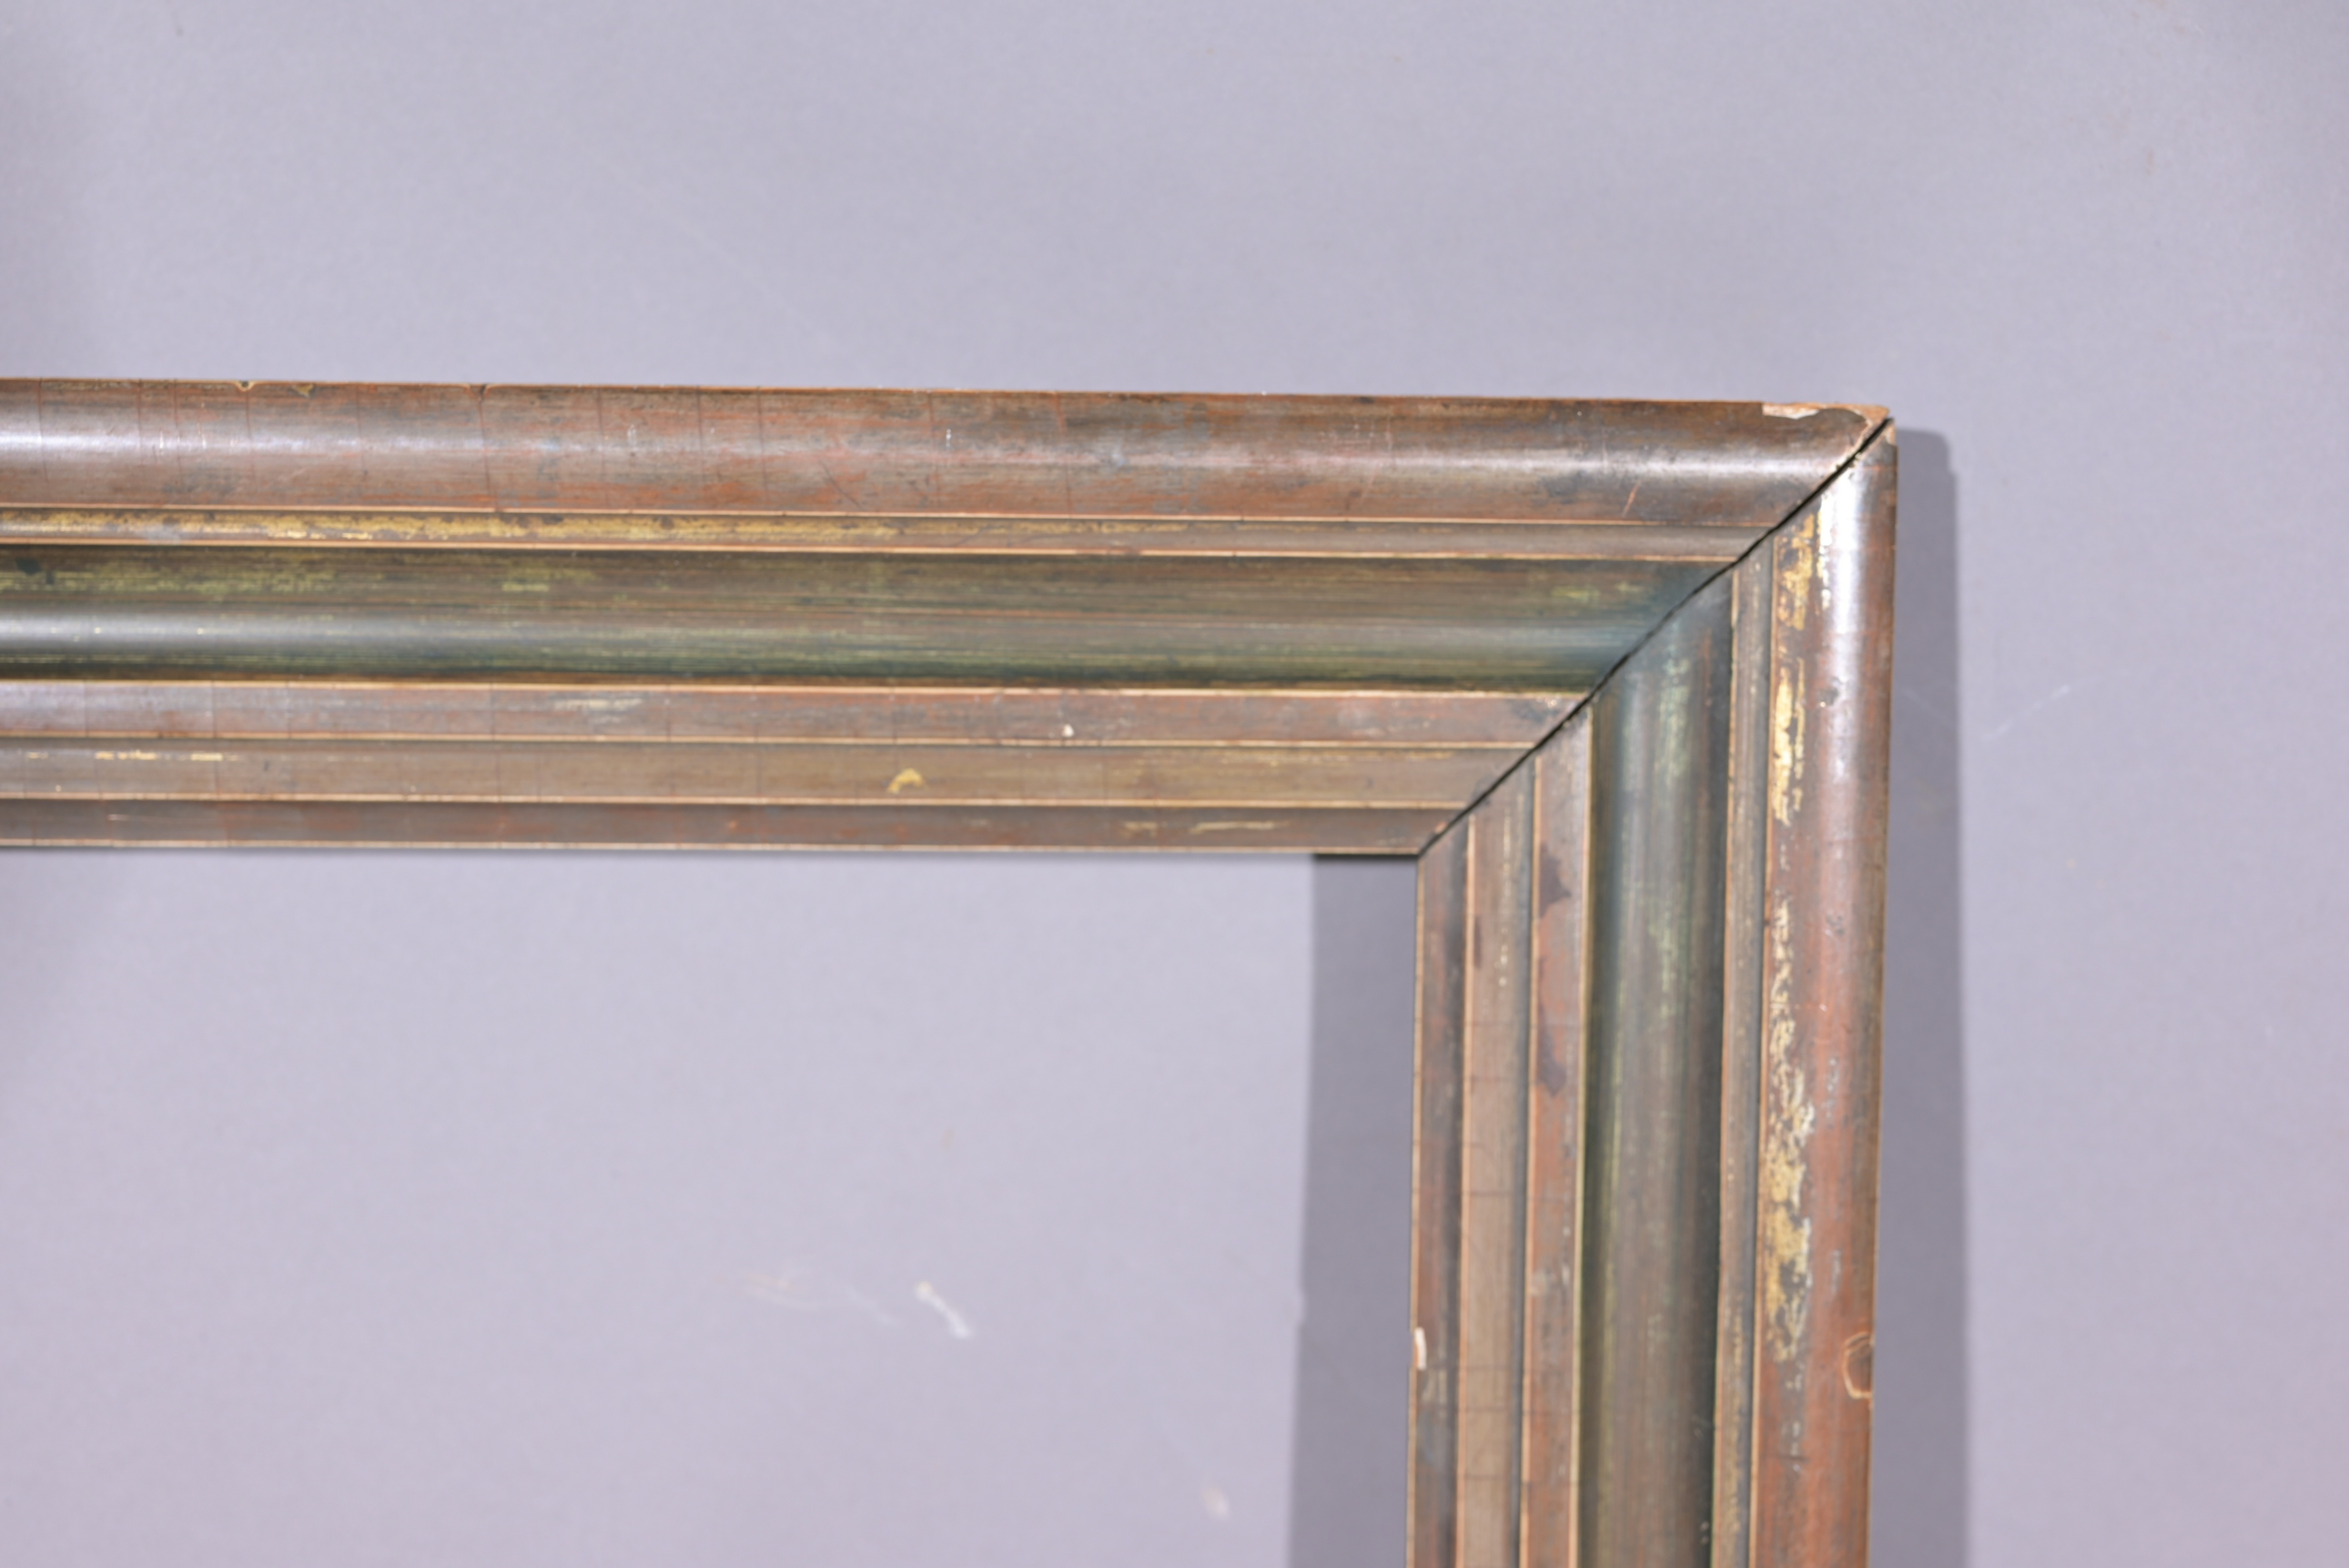 American 1830's Frame - 17 x 12 1/8 - Image 3 of 7